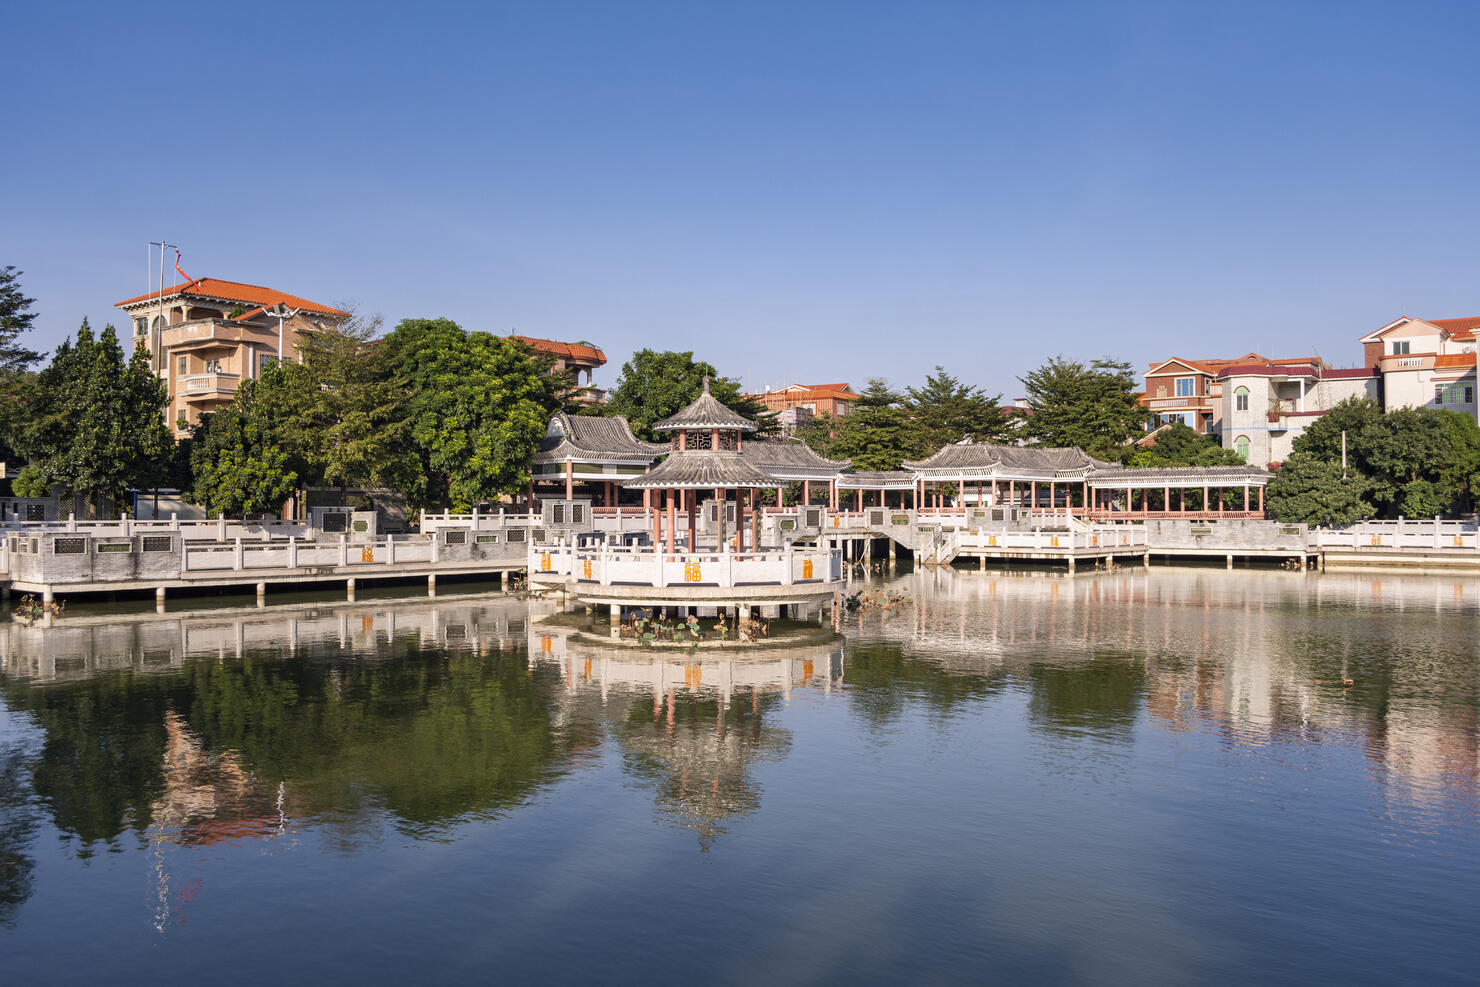 Chinese-style buildings beside the lake